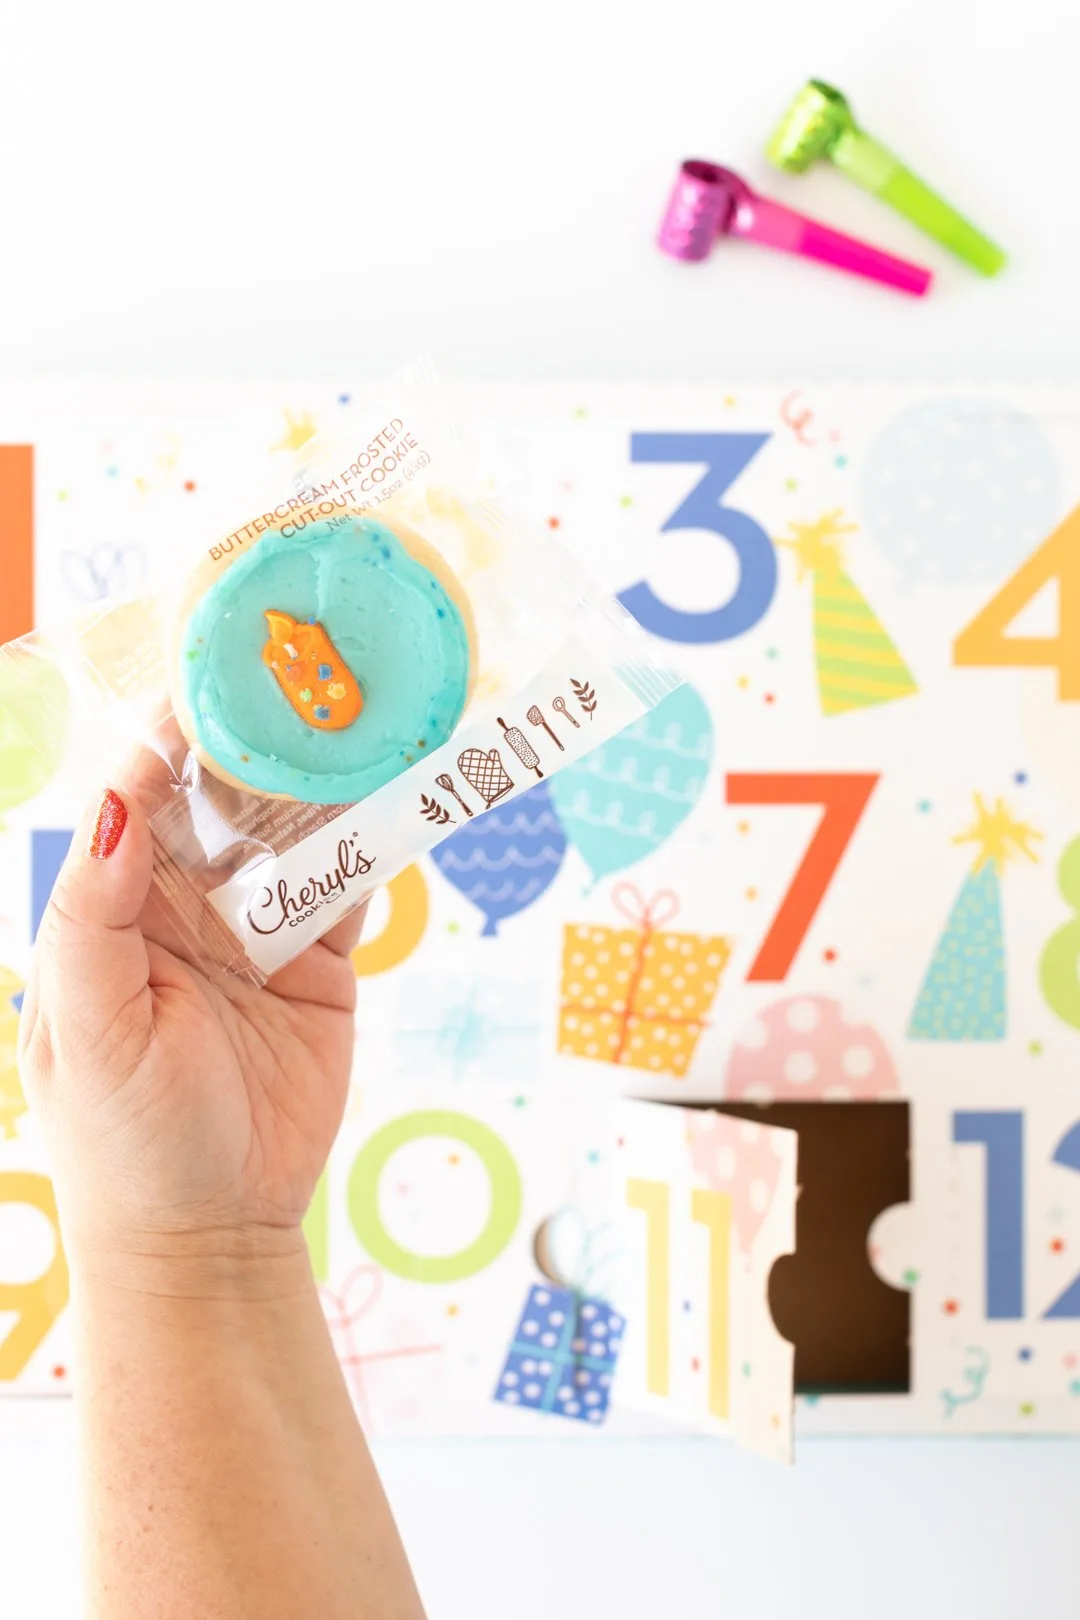 cheryl's birthday cookie reveal from countdown box